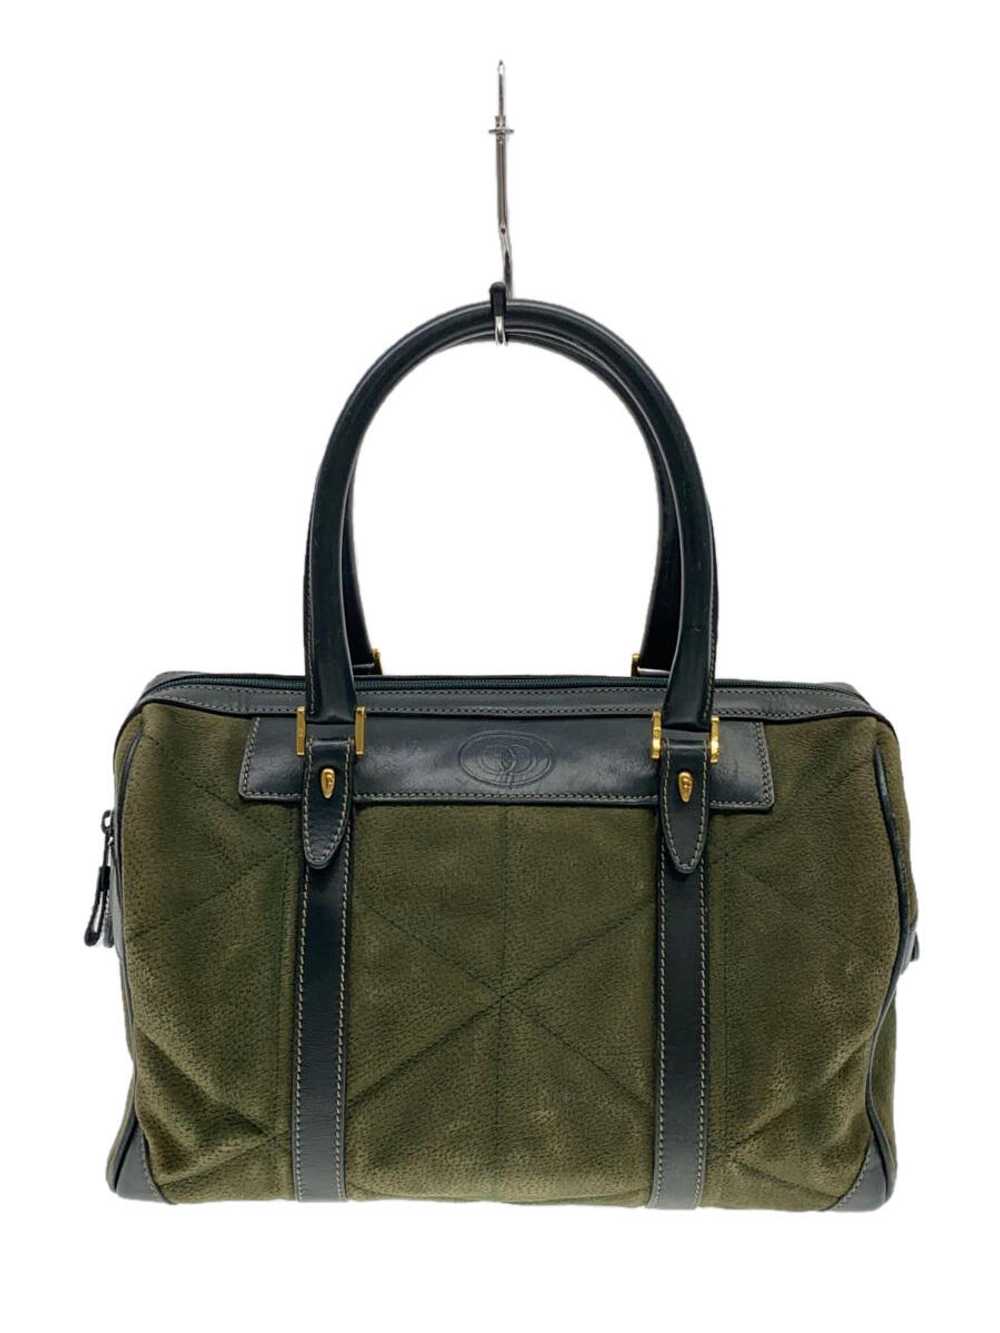 Used Gucci Boston Bag/Suede/Grn Bag - image 1